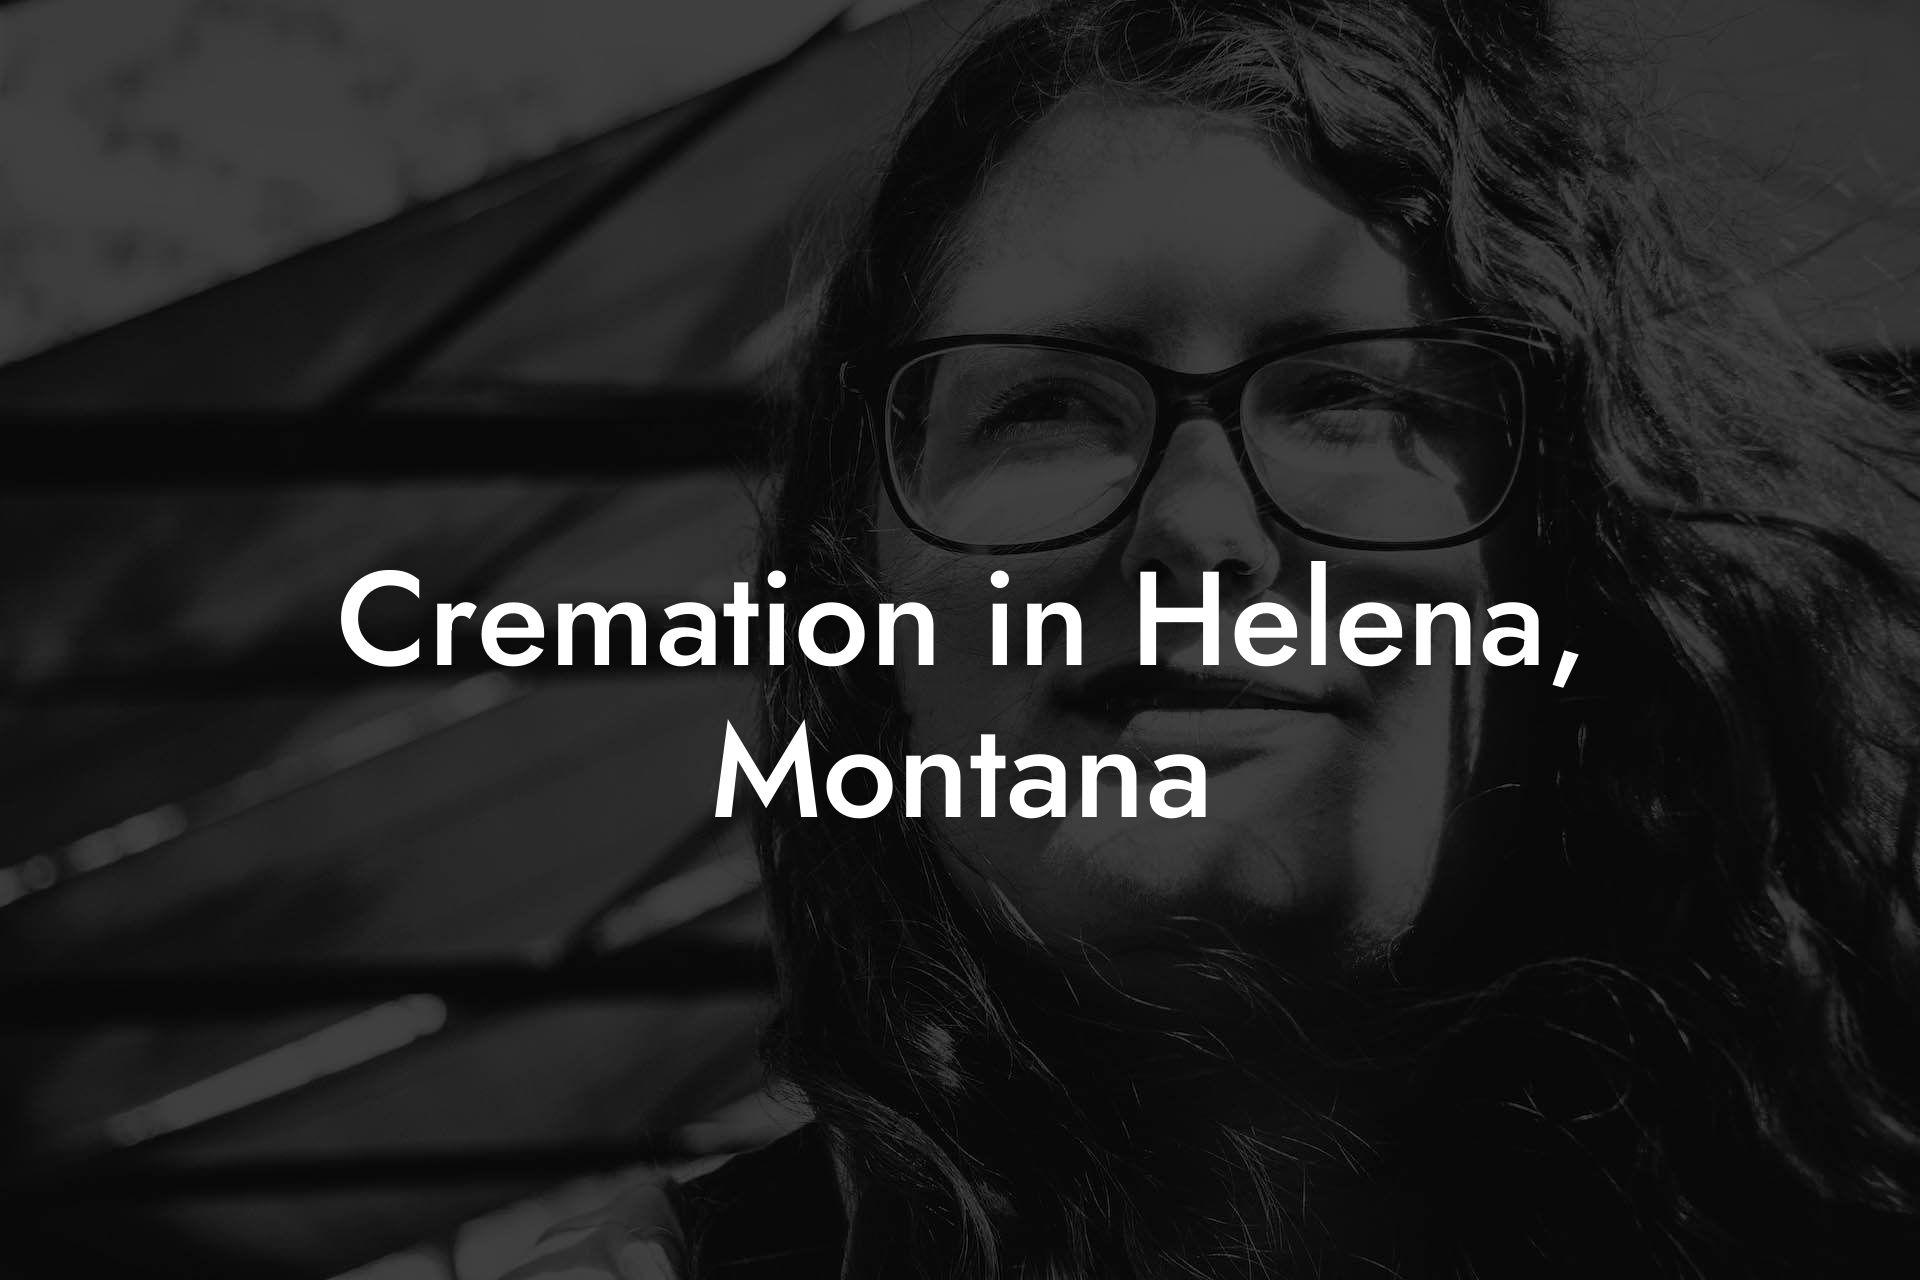 Cremation in Helena, Montana